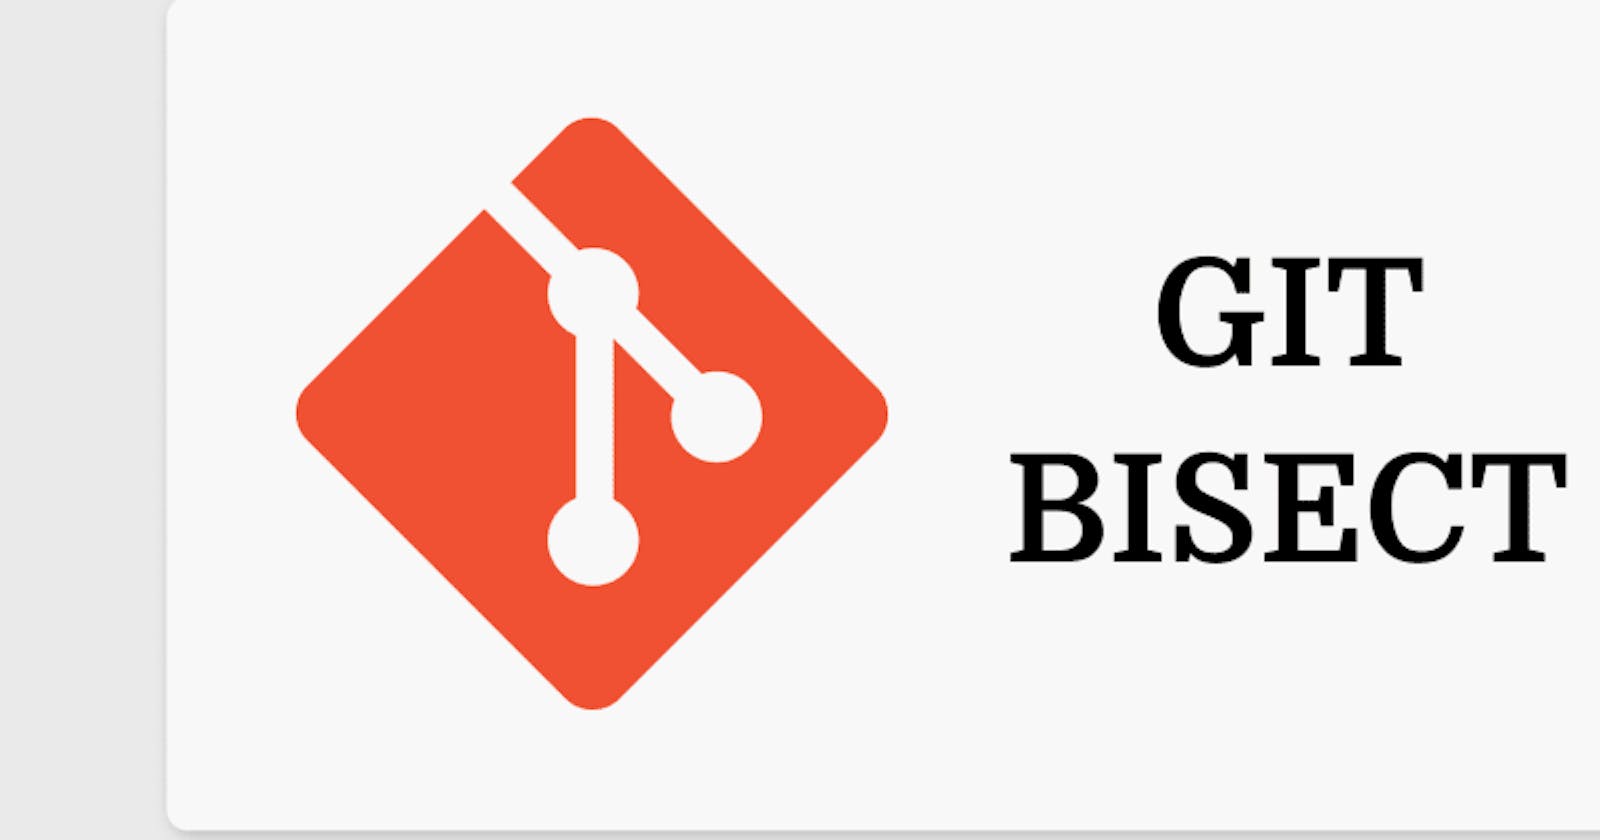 Use Git Bisect to Find the Commit That Introduced a Bug